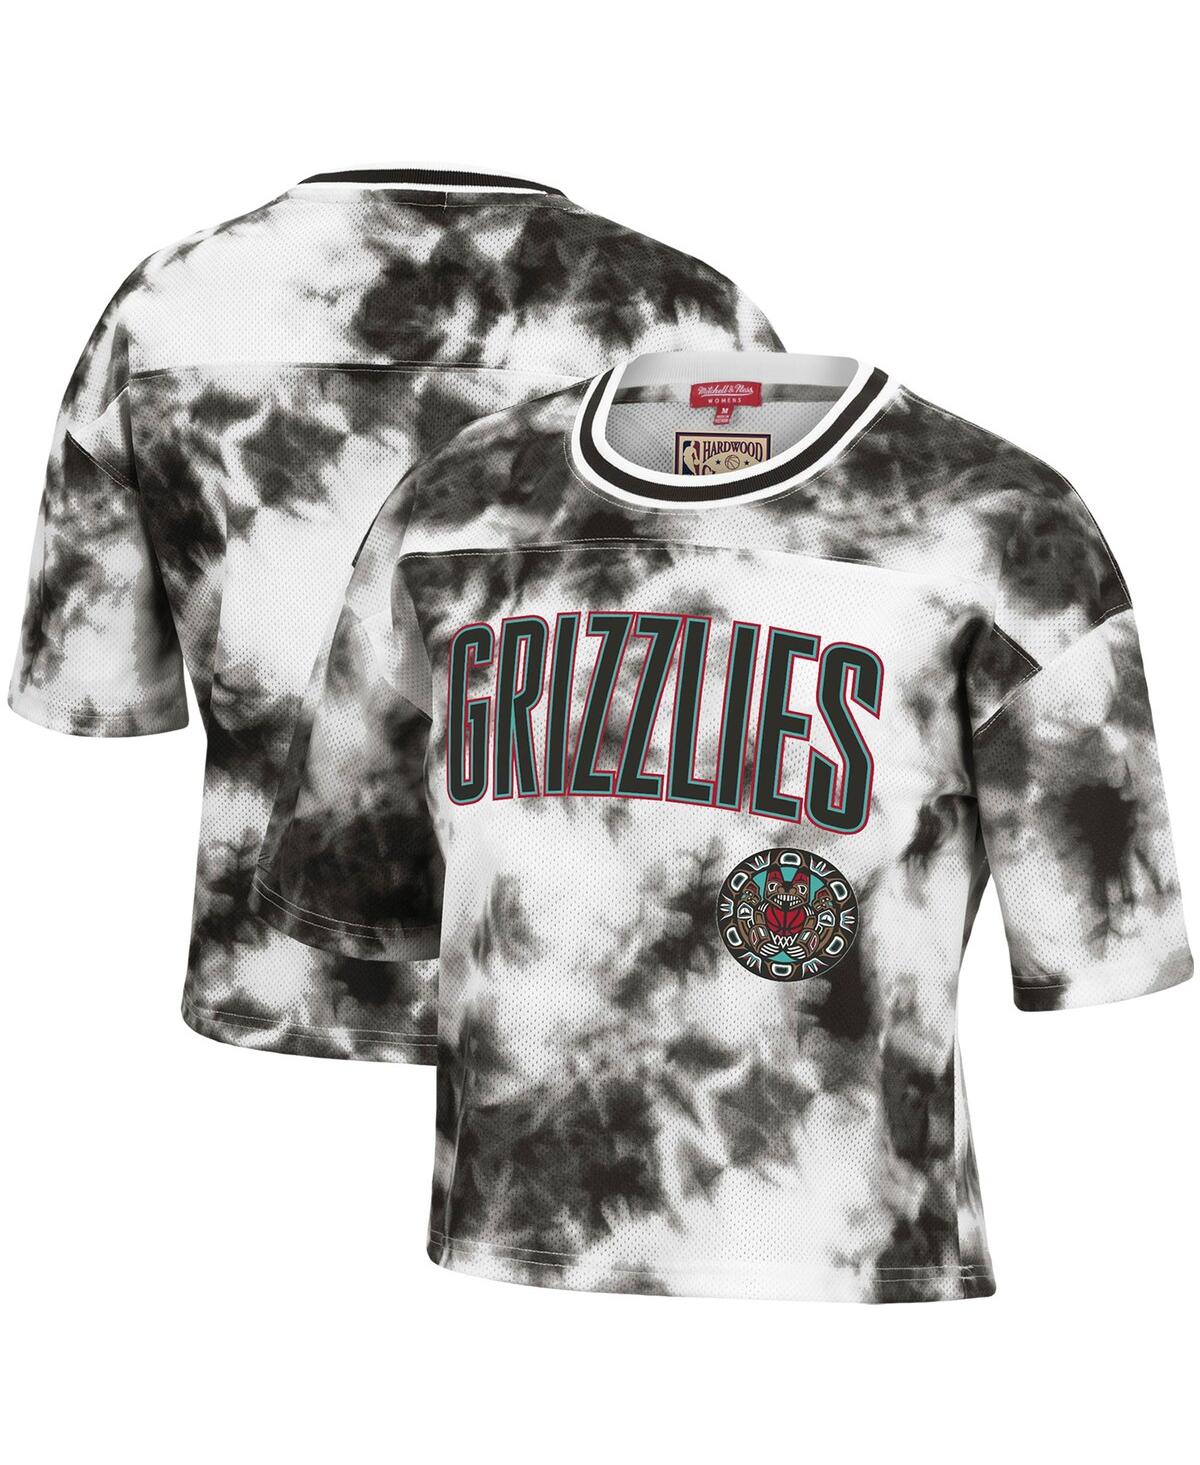 Colosseum Women's Mitchell & Ness Black, White Vancouver Grizzlies Hardwood Classics Tie-dye Cropped T-shirt In Black,white